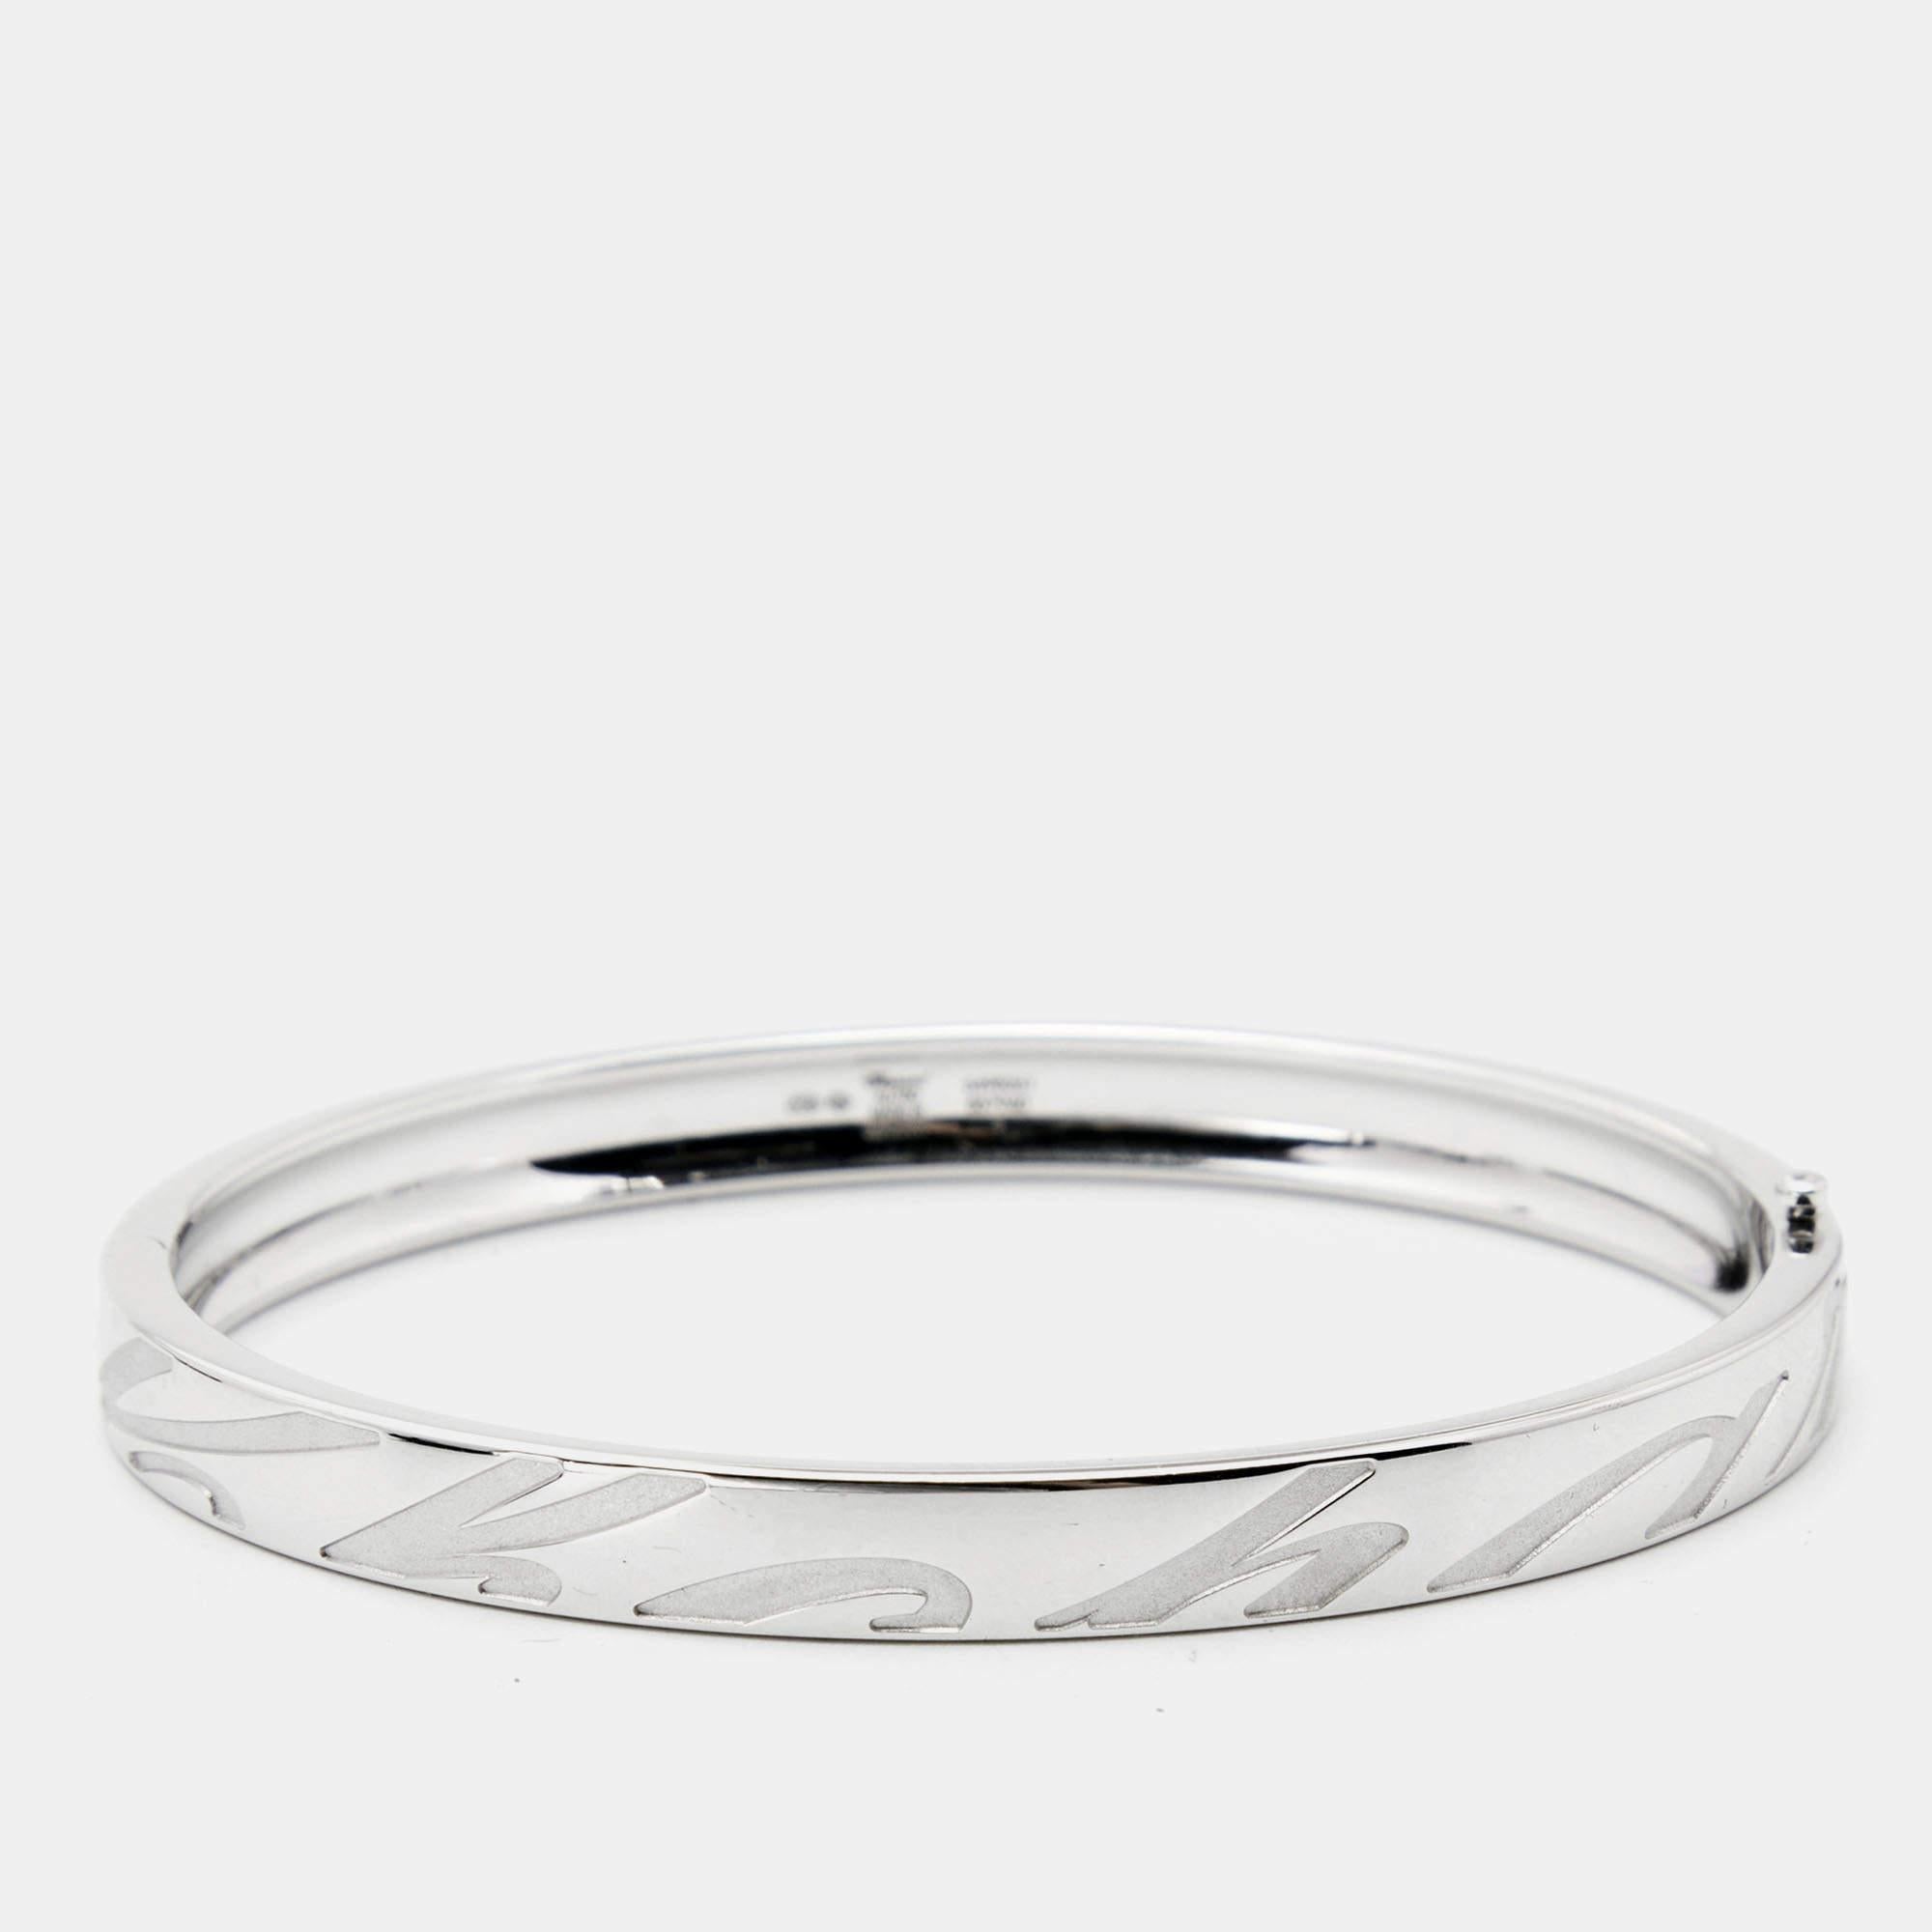 Aesthetic Movement Chopard Chopardissimo 18k White Gold Bracelet S For Sale